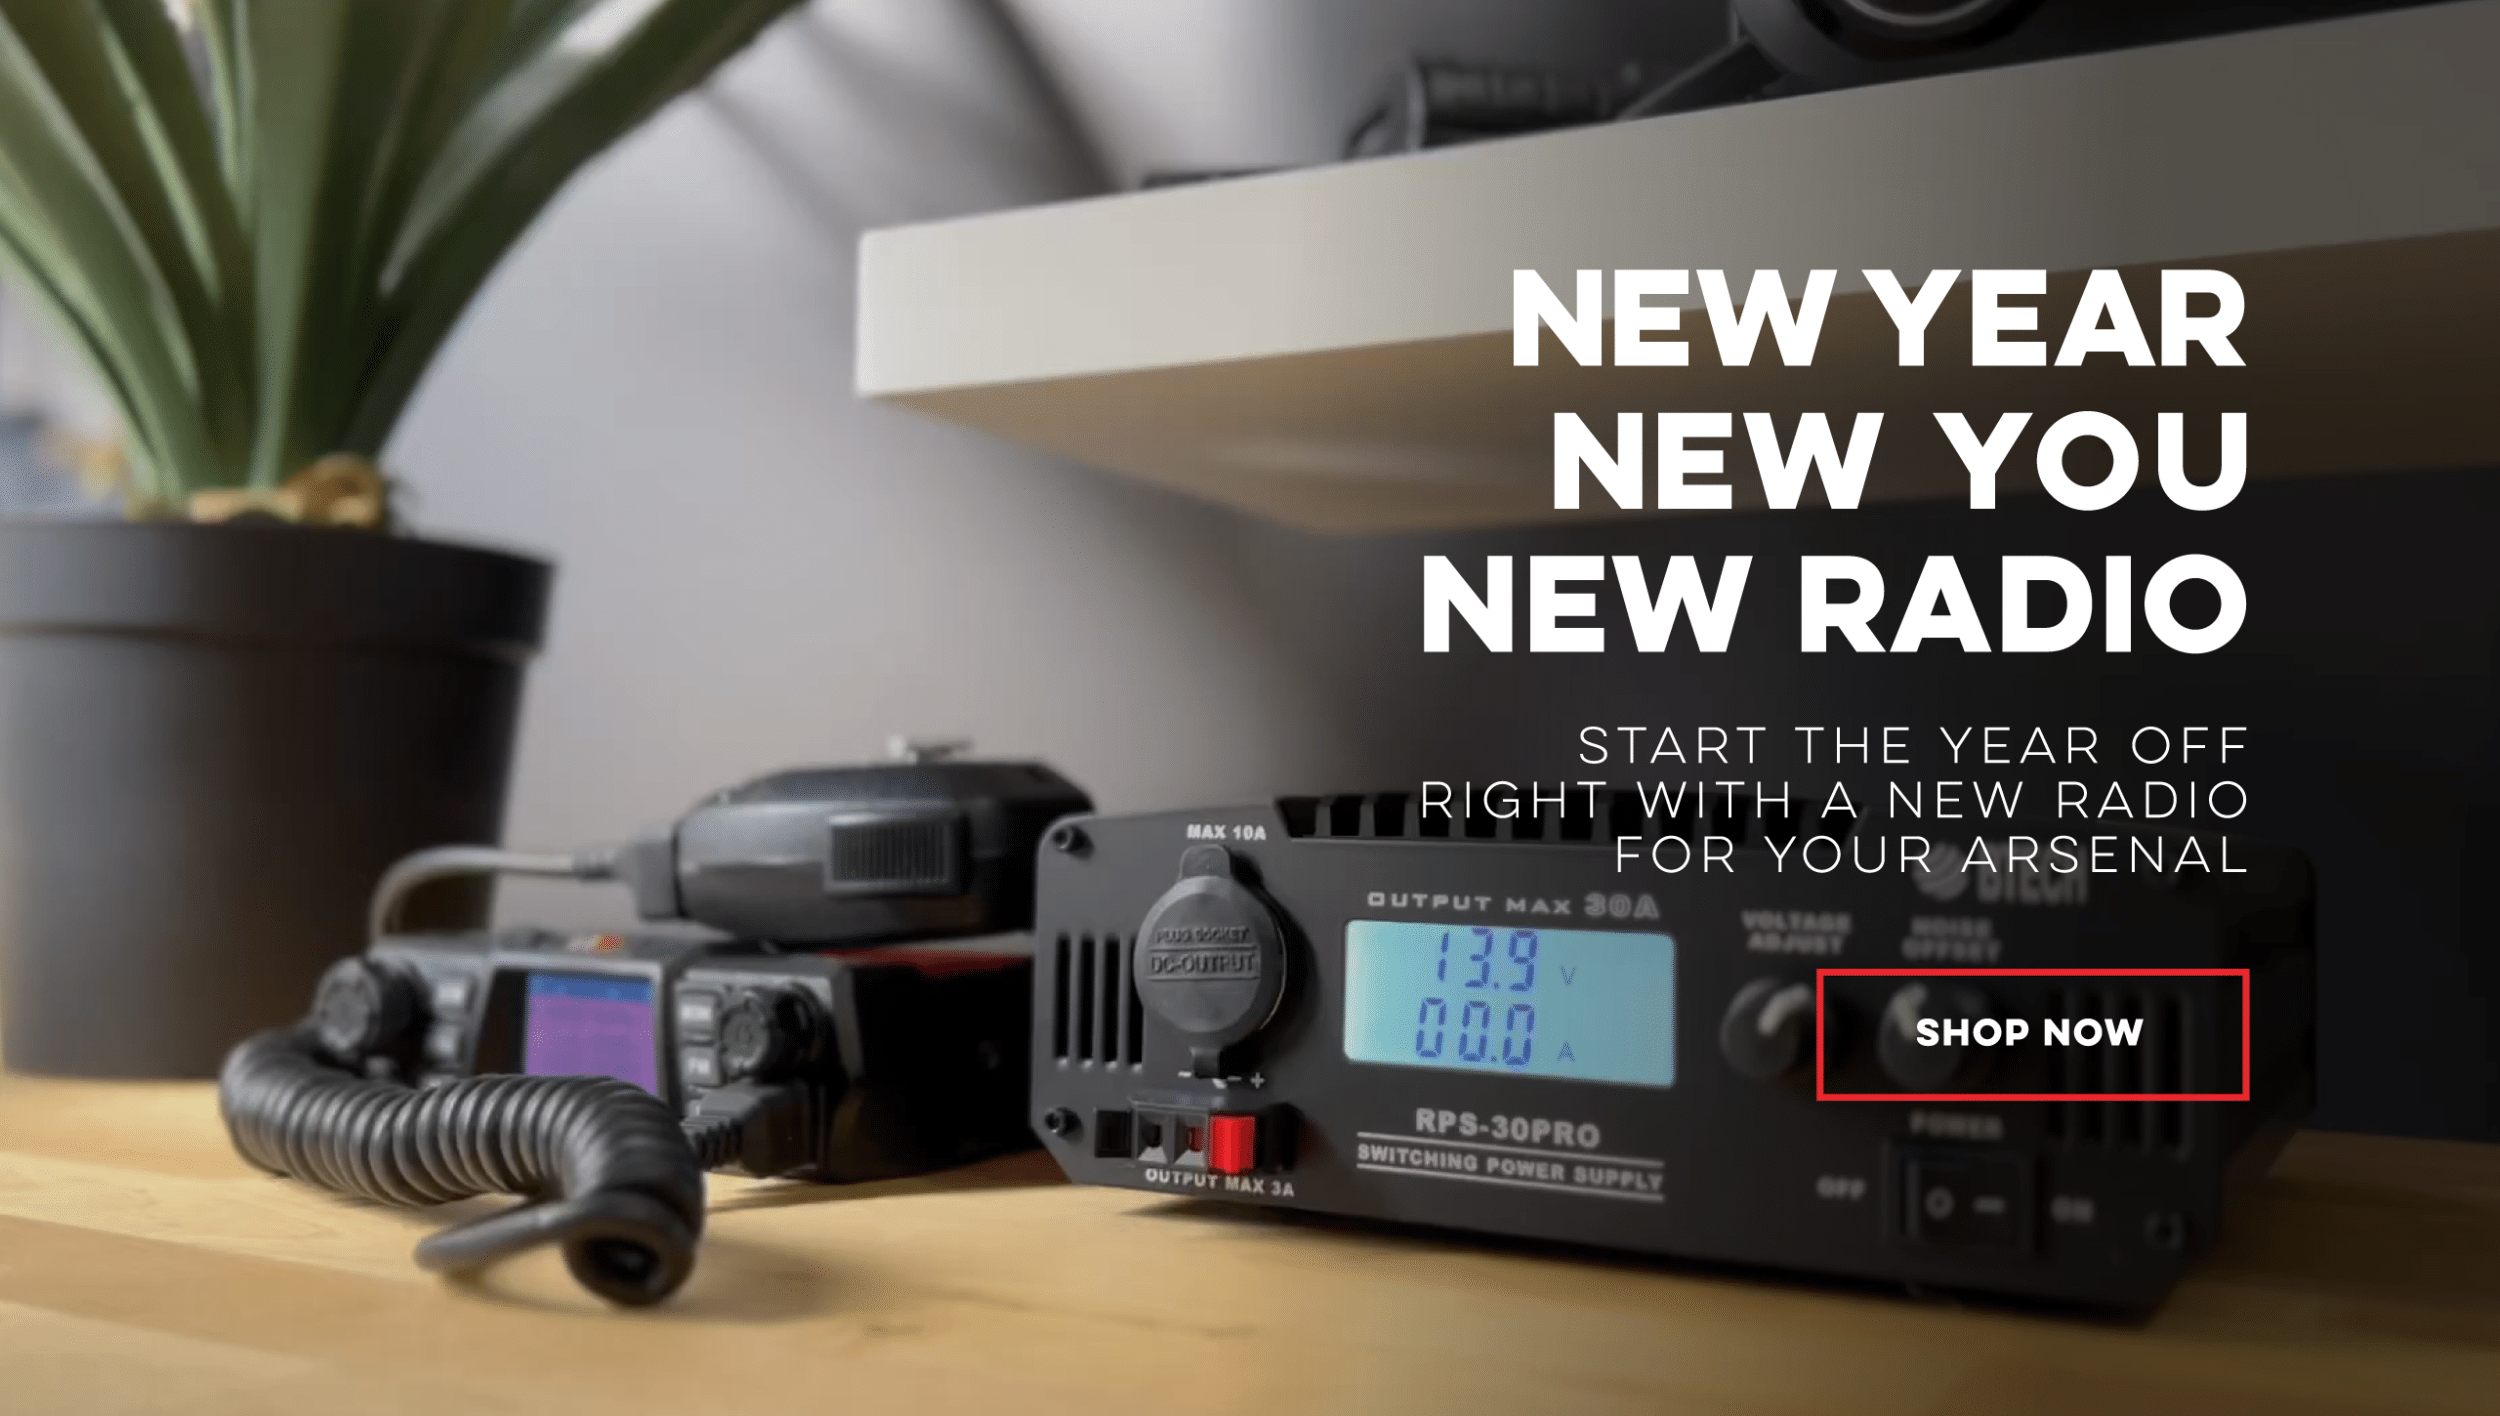 New Year, New You, New Radio, Start the Year off right with a new radio for your arsenal.